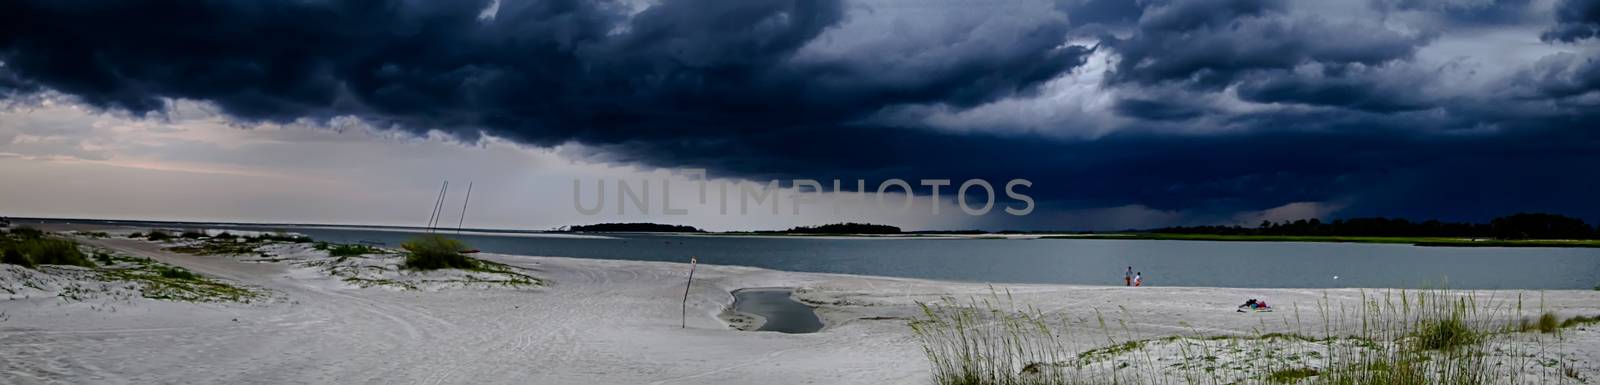 tybee island beach scenes during rain and thunder storm by digidreamgrafix